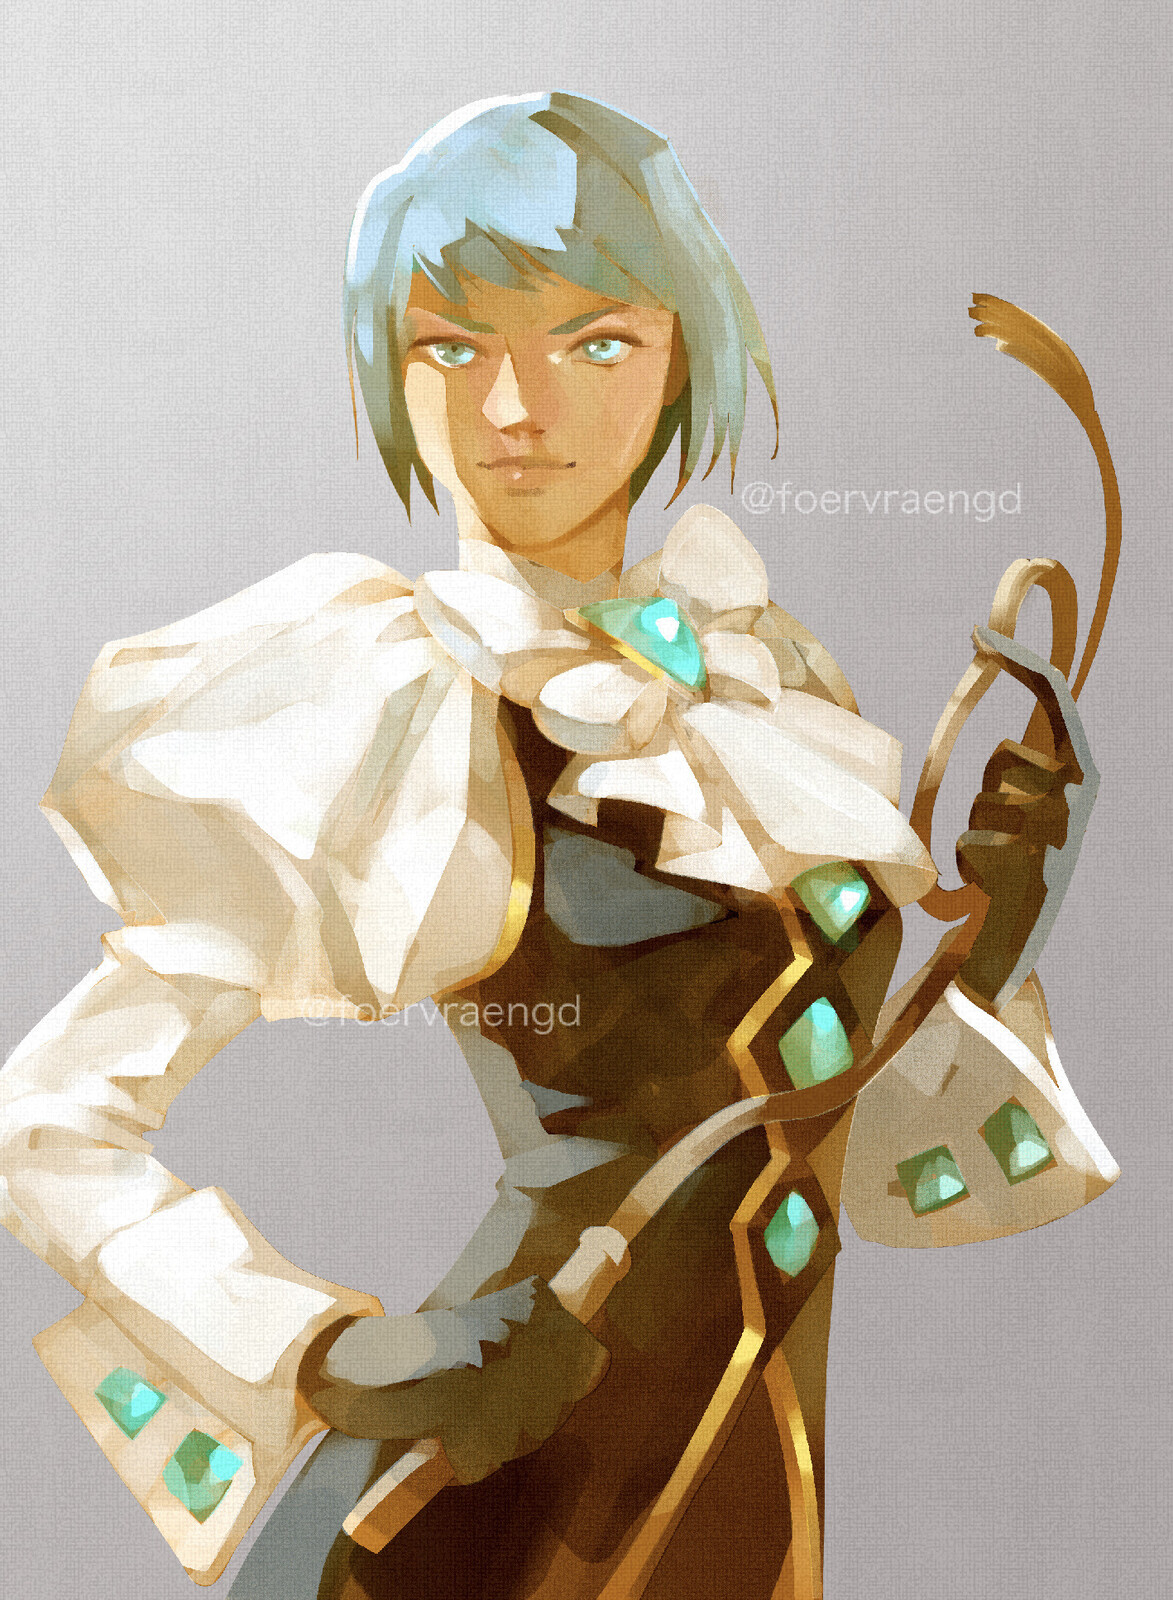 fanart of the character Franziska von Karma from the Ace Attorney game series.